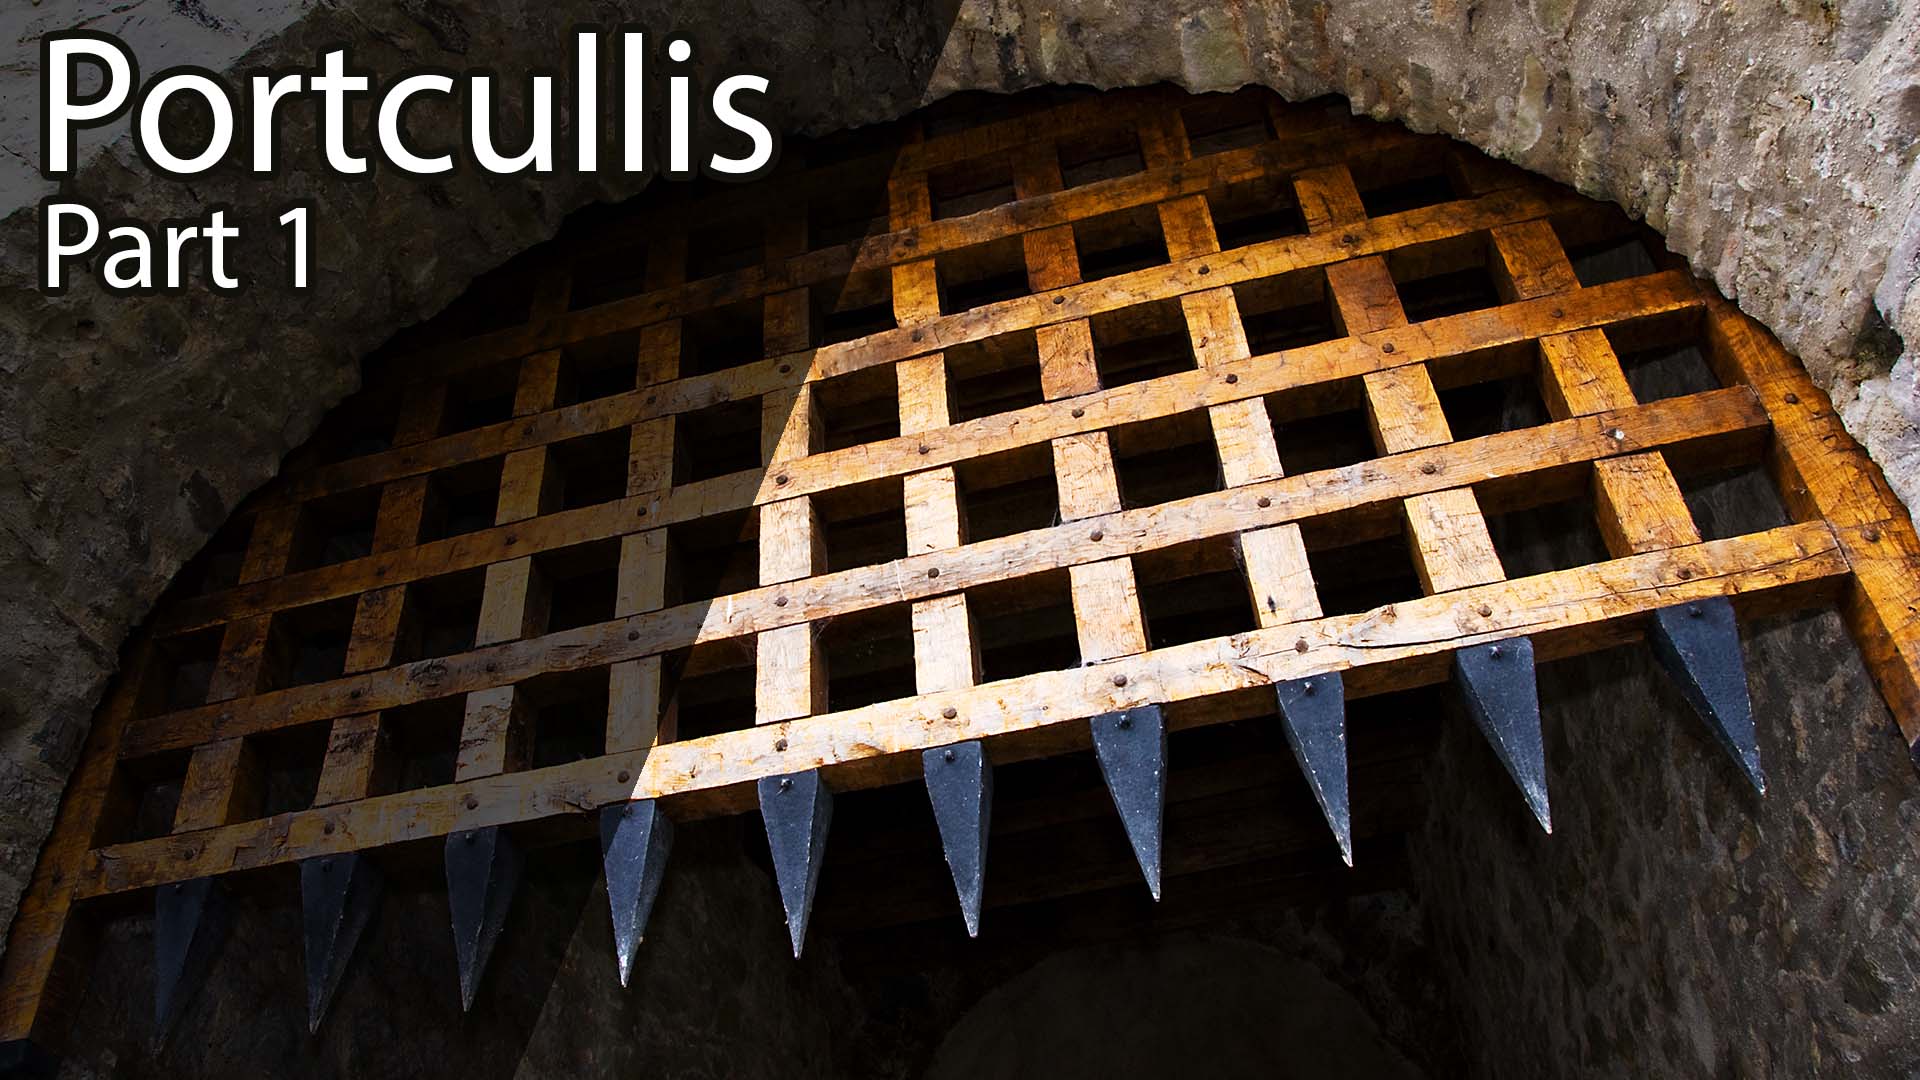 Making my first game - Portcullis (Part 1)